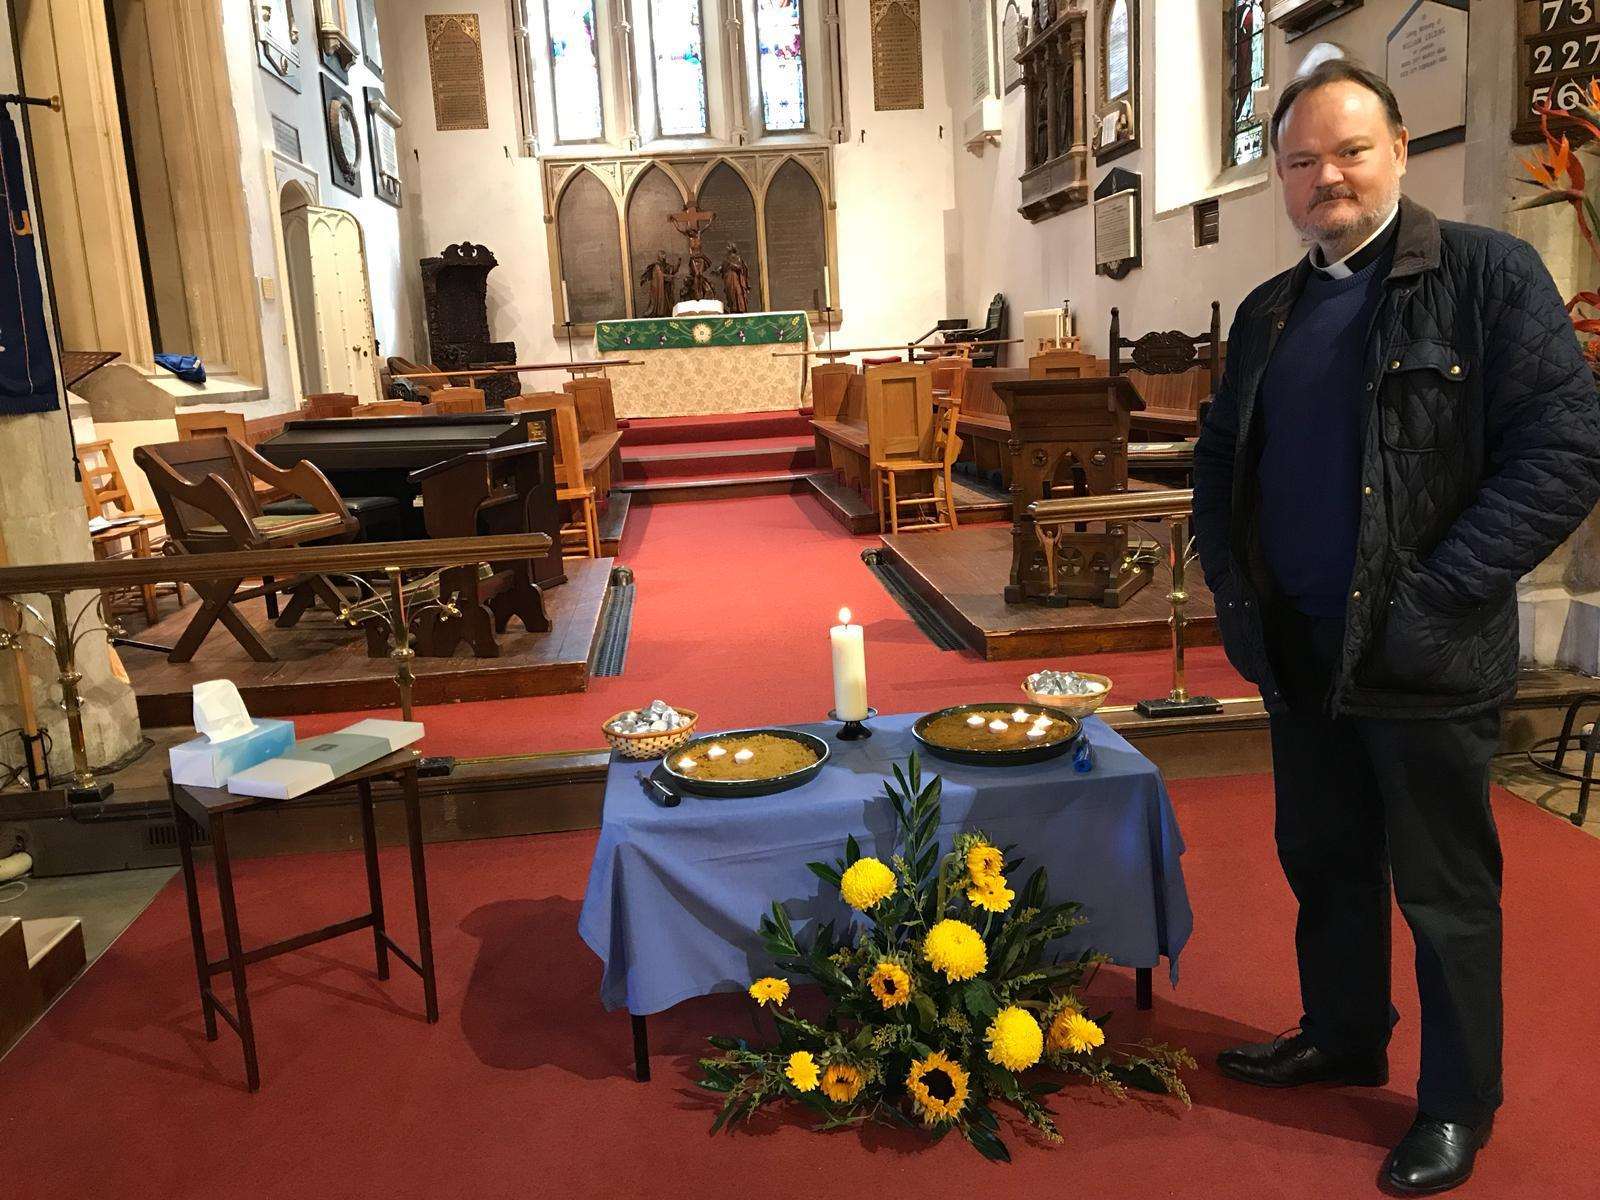 St Mary's Church in Hadlow is inviting mourners to light a candle and say a prayer (4498783)